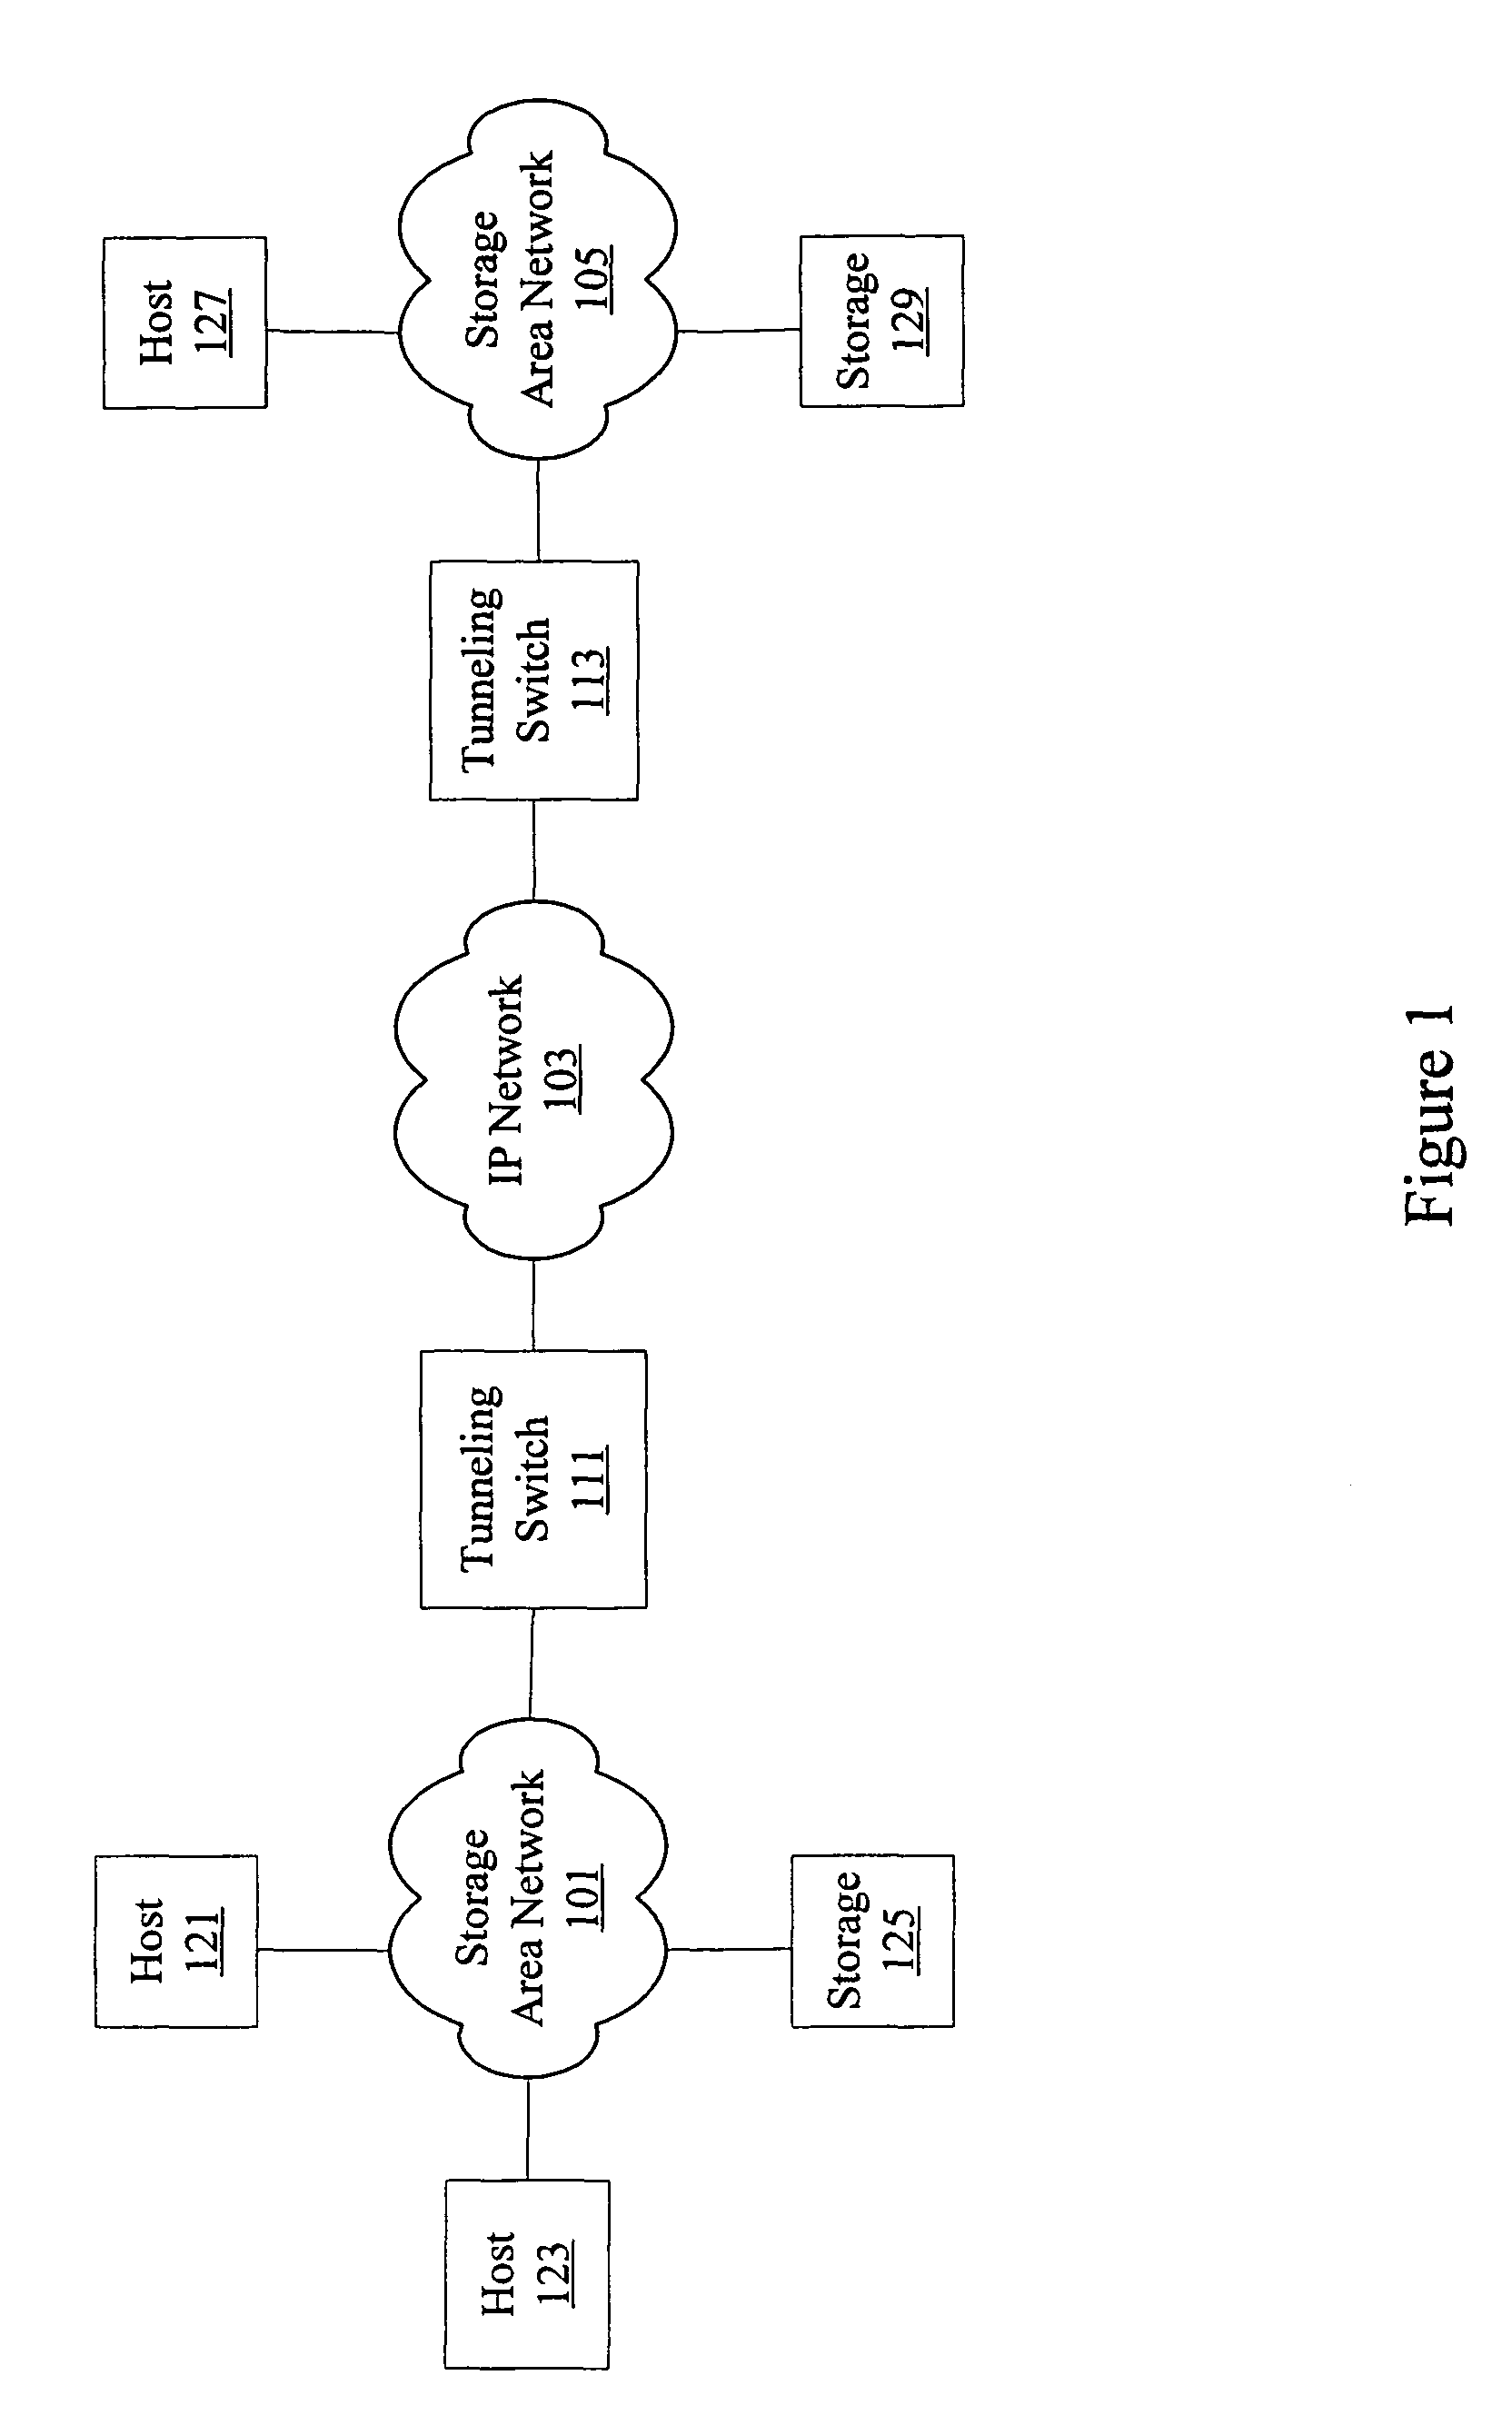 Transmission control protocol (TCP) congestion control using transmission delay components